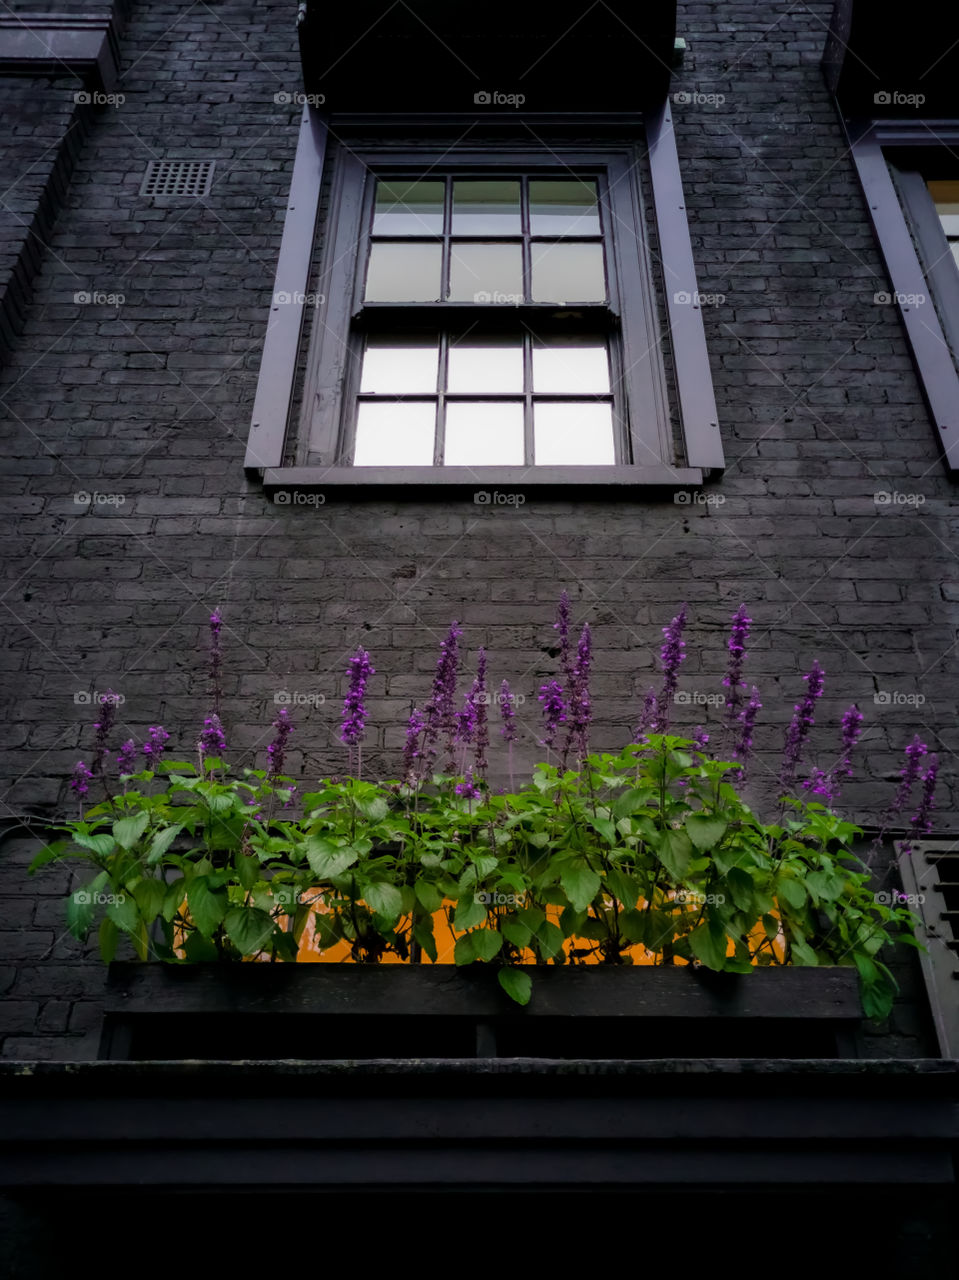 Purple flowers in flower box on window sill against black painted houses facade.